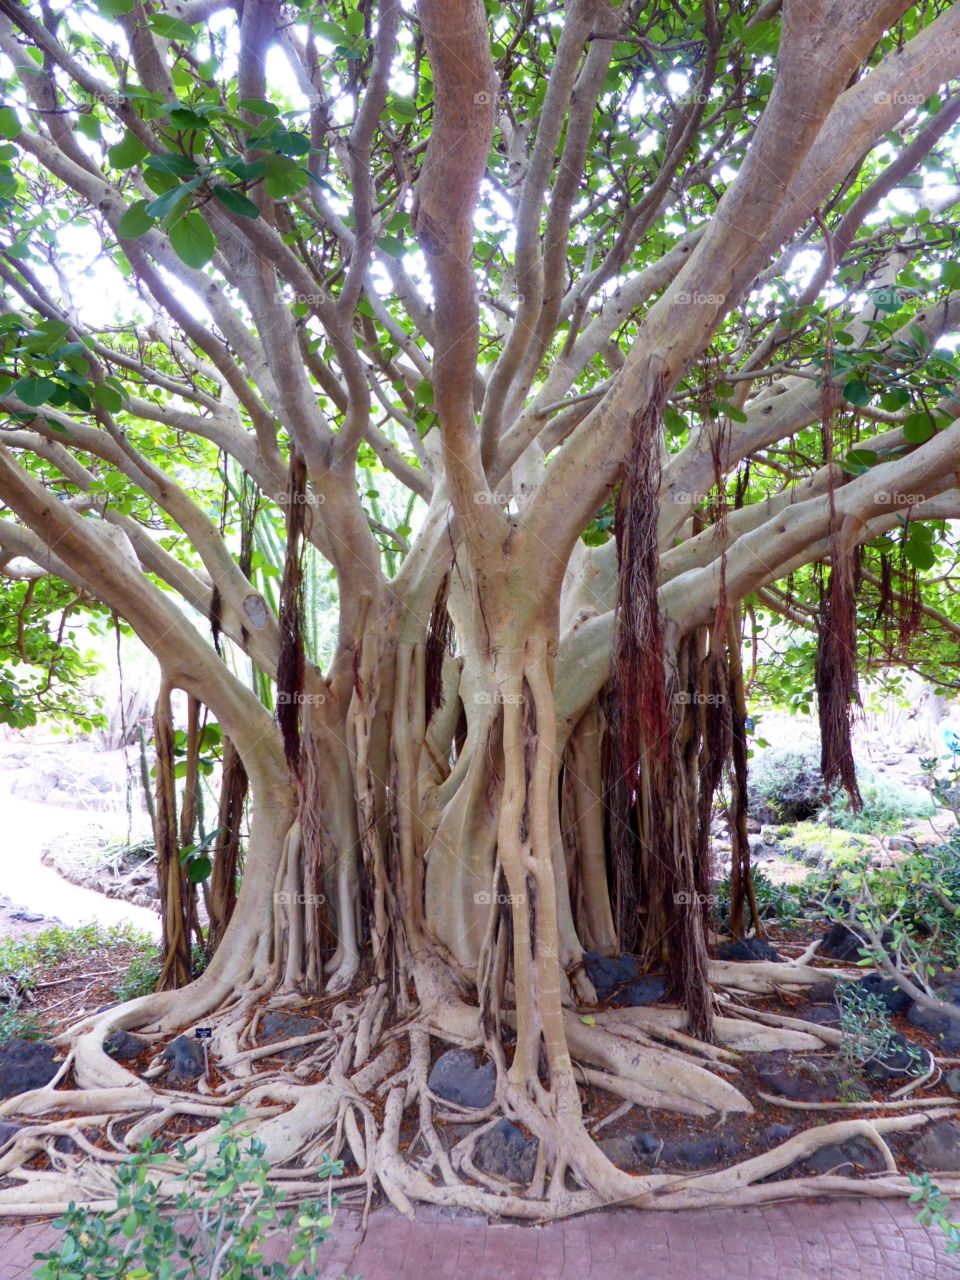 Large Moreton Bay fig tree with aerial roots in Gran Canaria